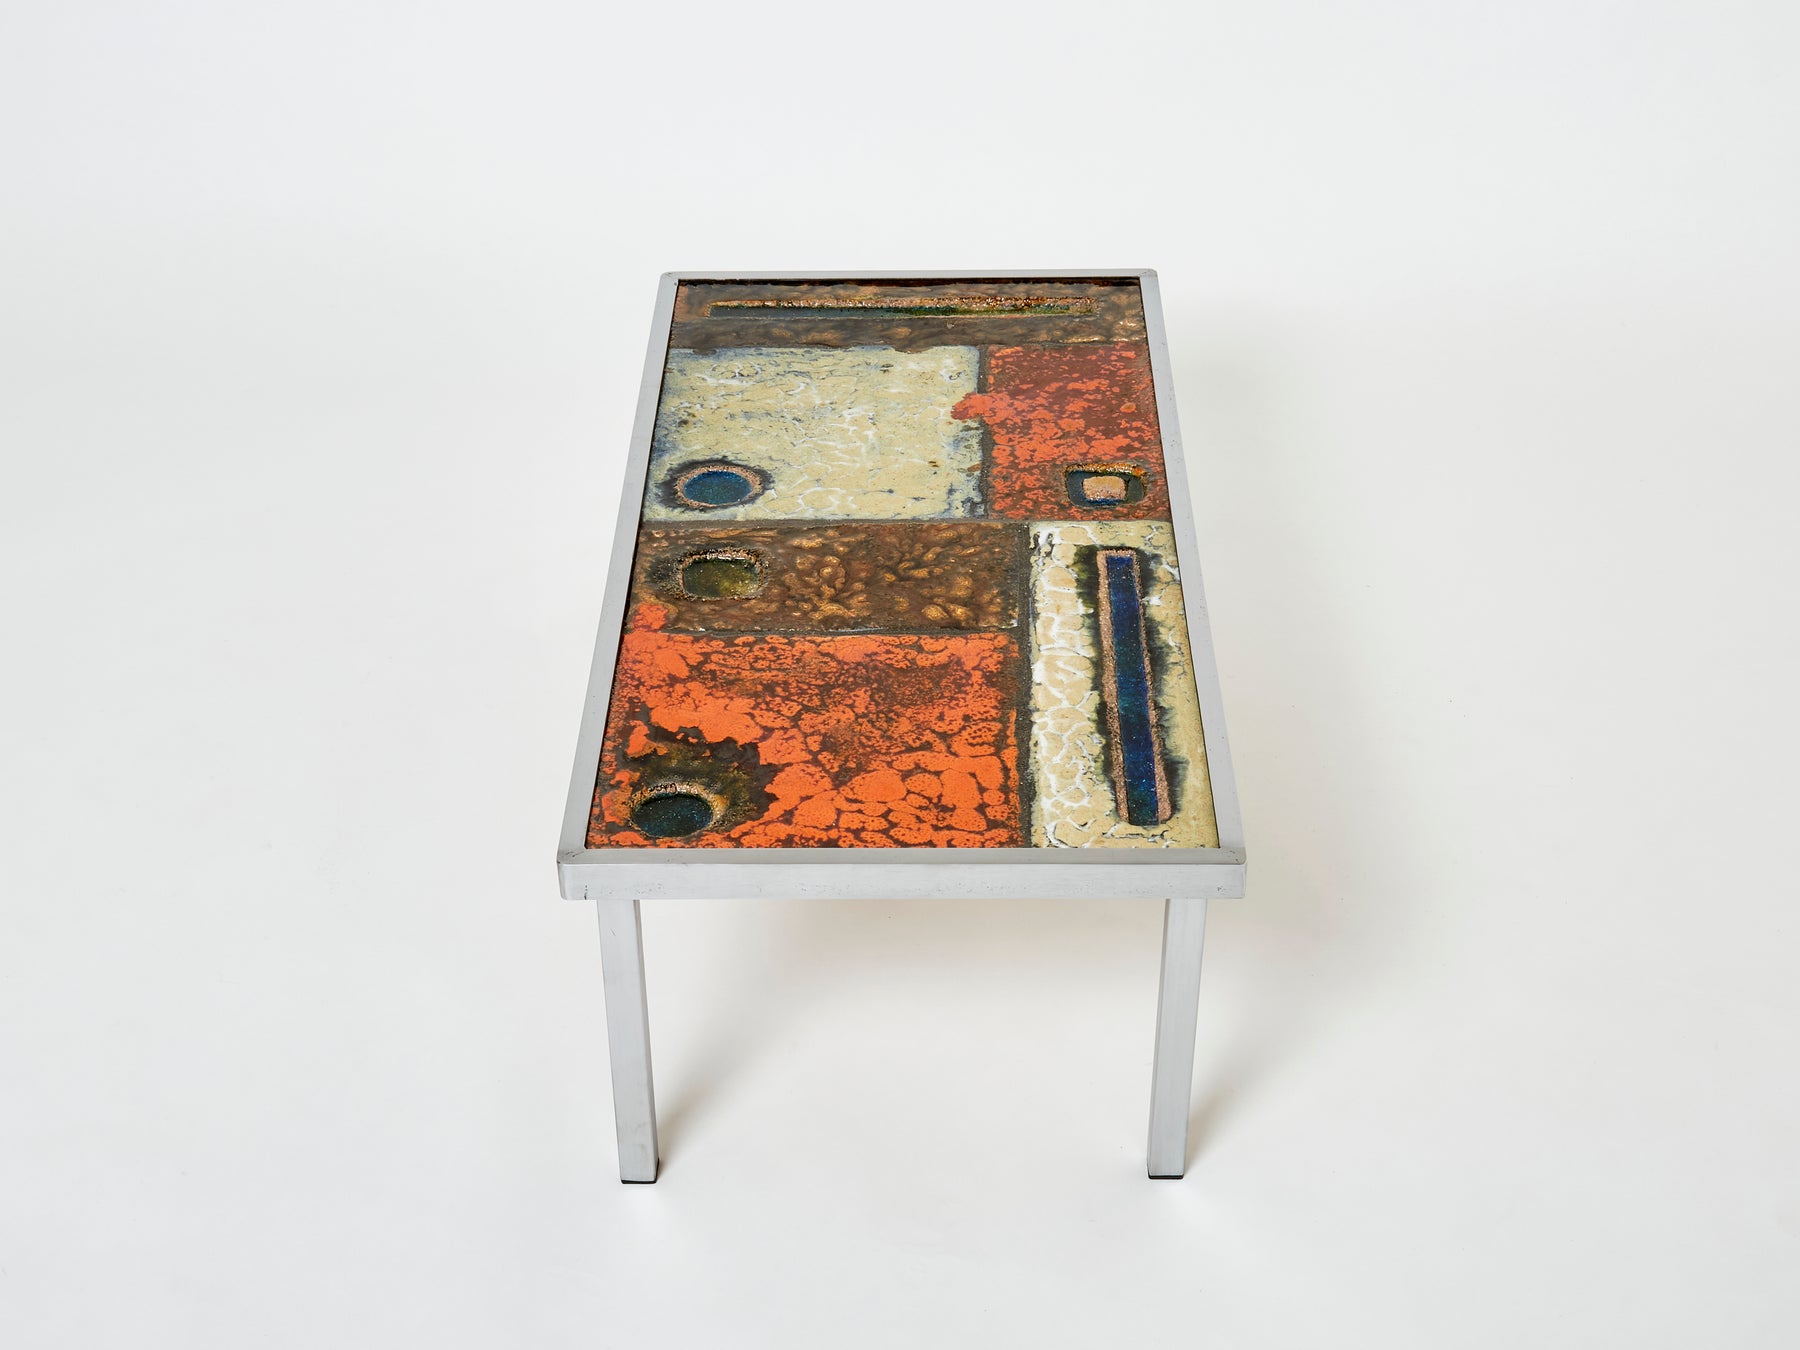 Robert and Jean Cloutier ceramic steel coffee table 1950s